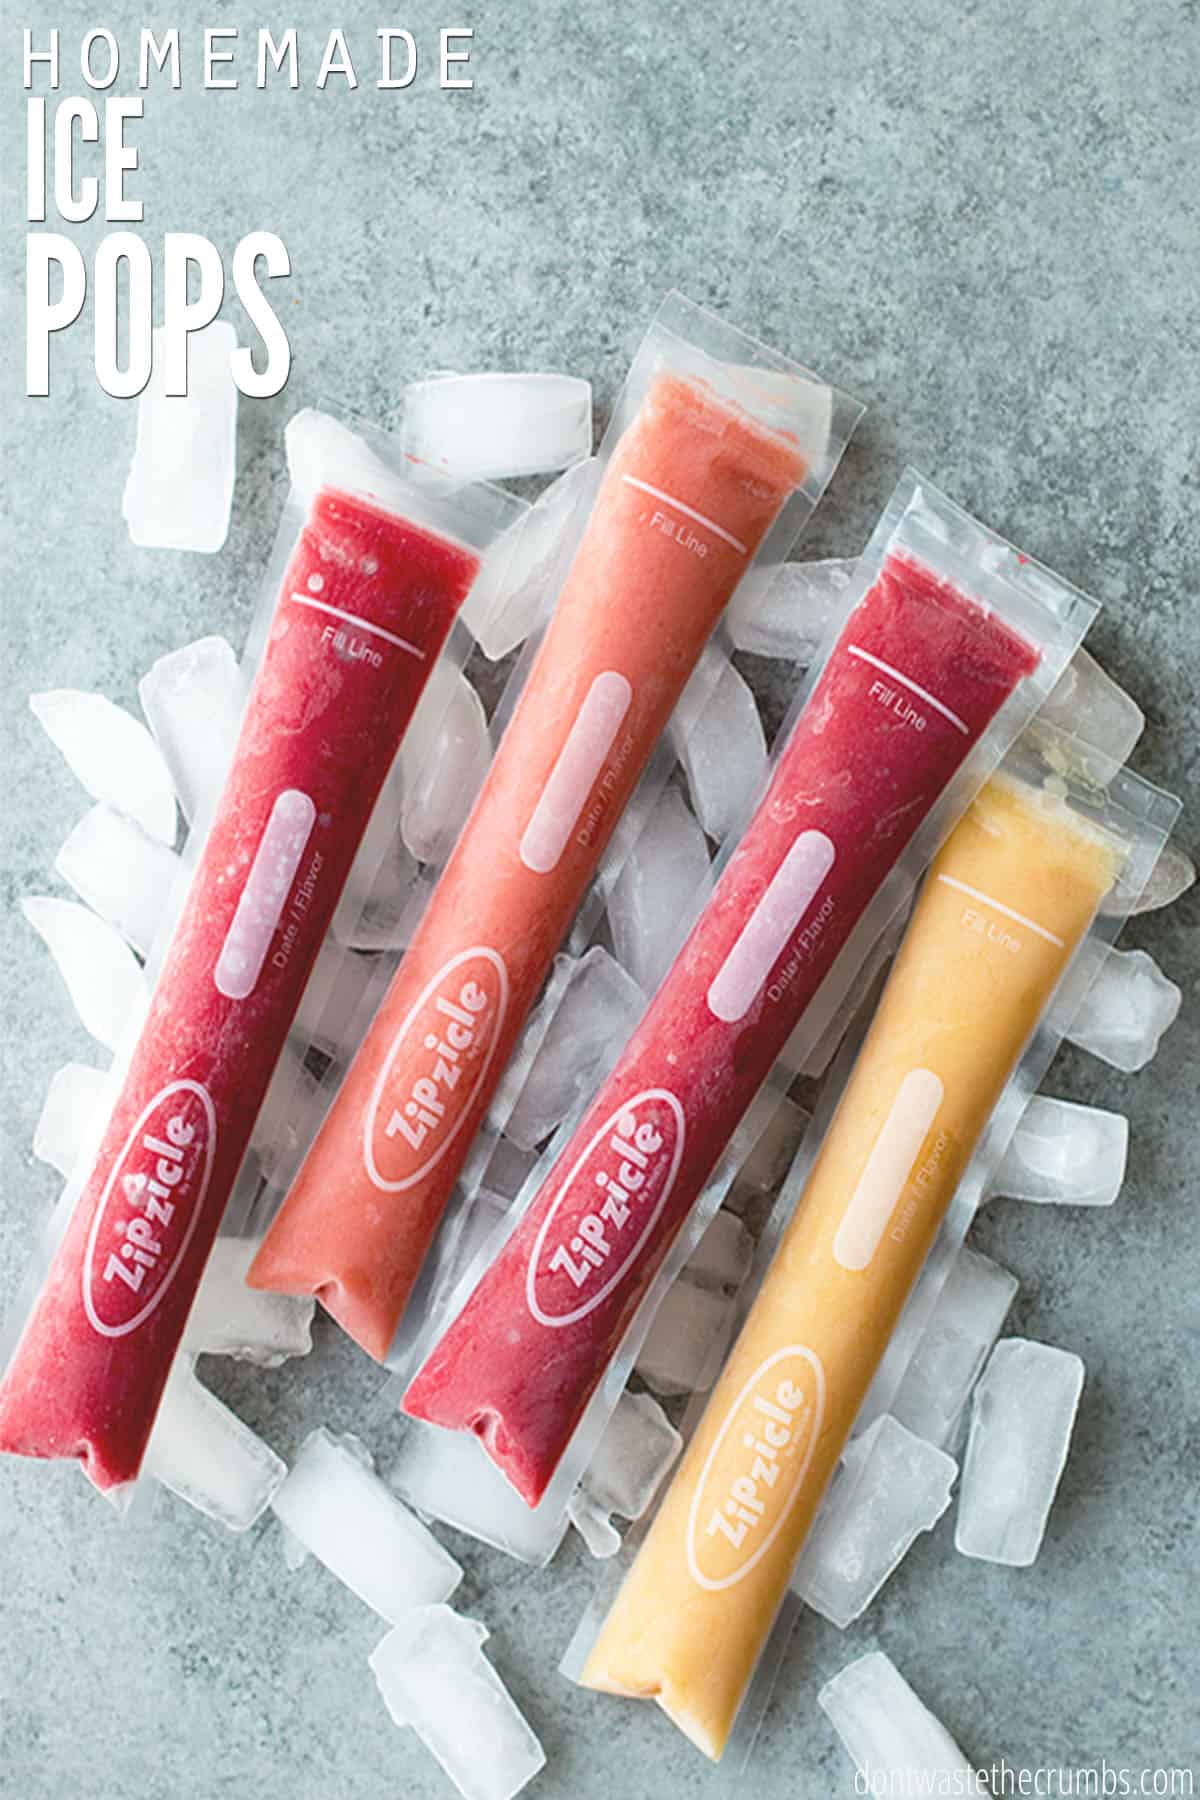 Four homemade ice pops of various flavors lying on scattered ice cubes